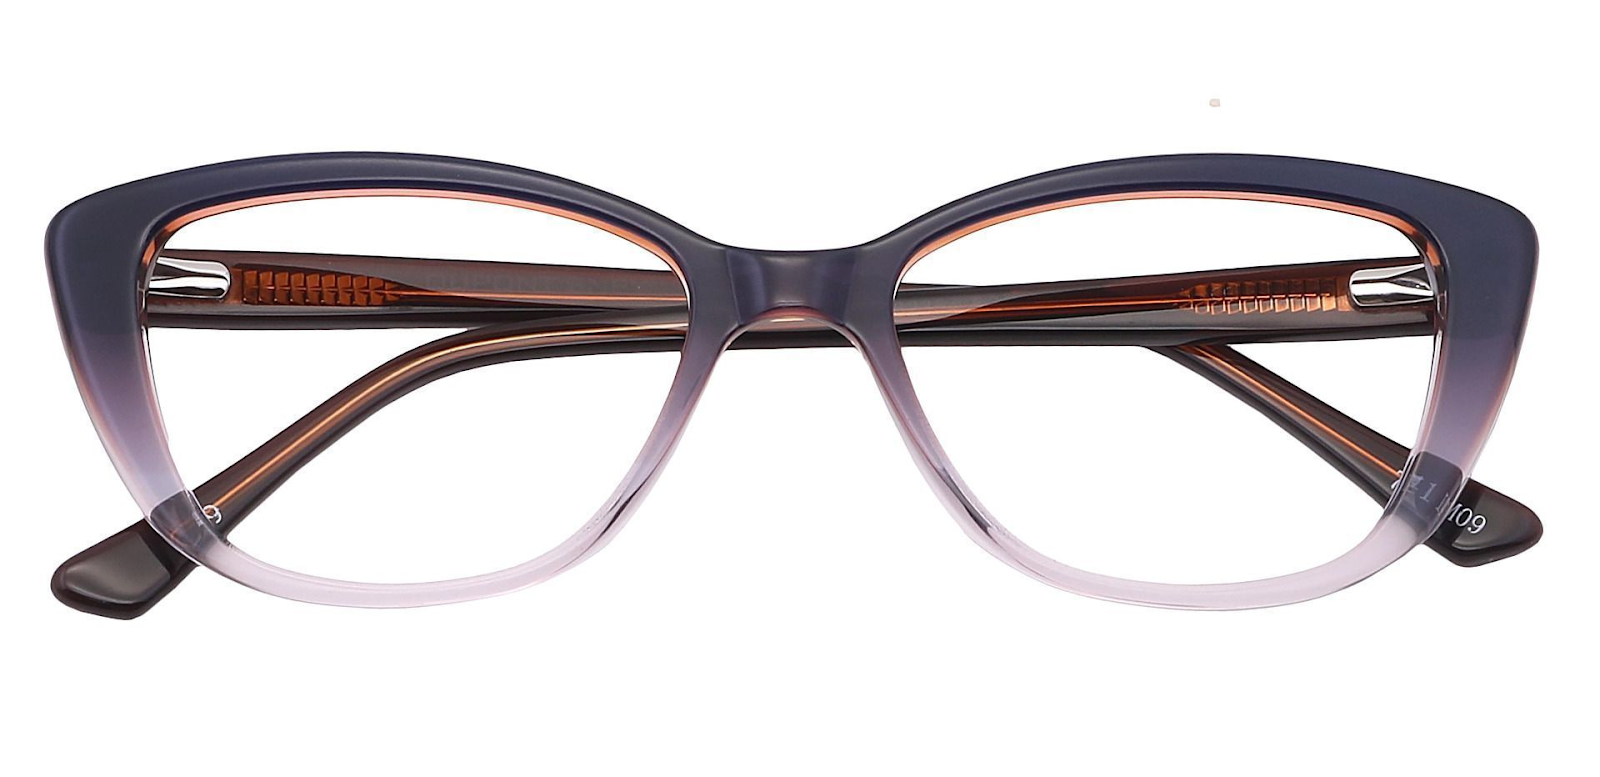 A pair of purple and white glasses with cat eye-shaped frames.